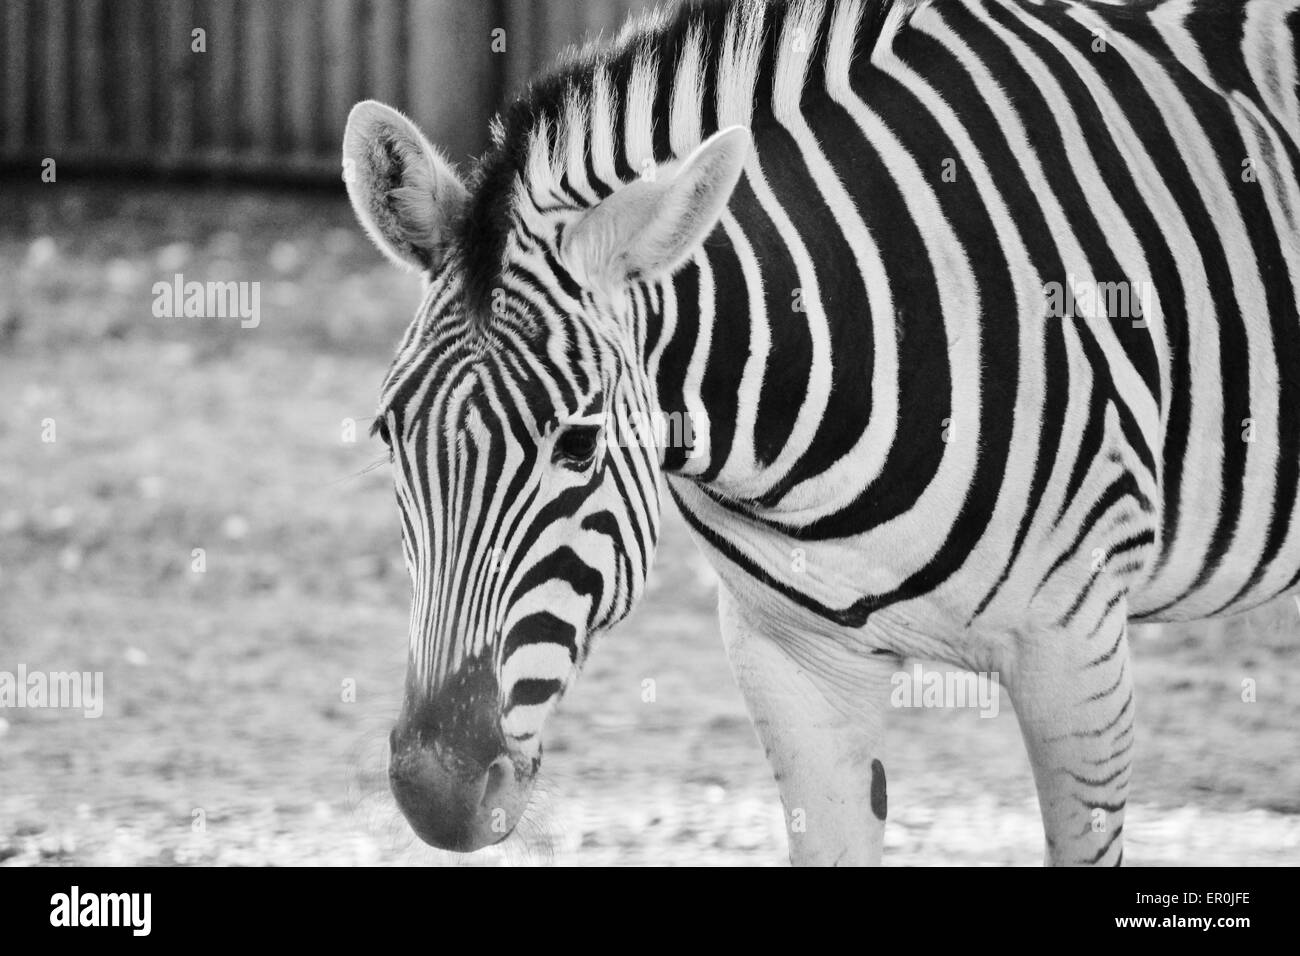 zebra in compound at zoo Stock Photo